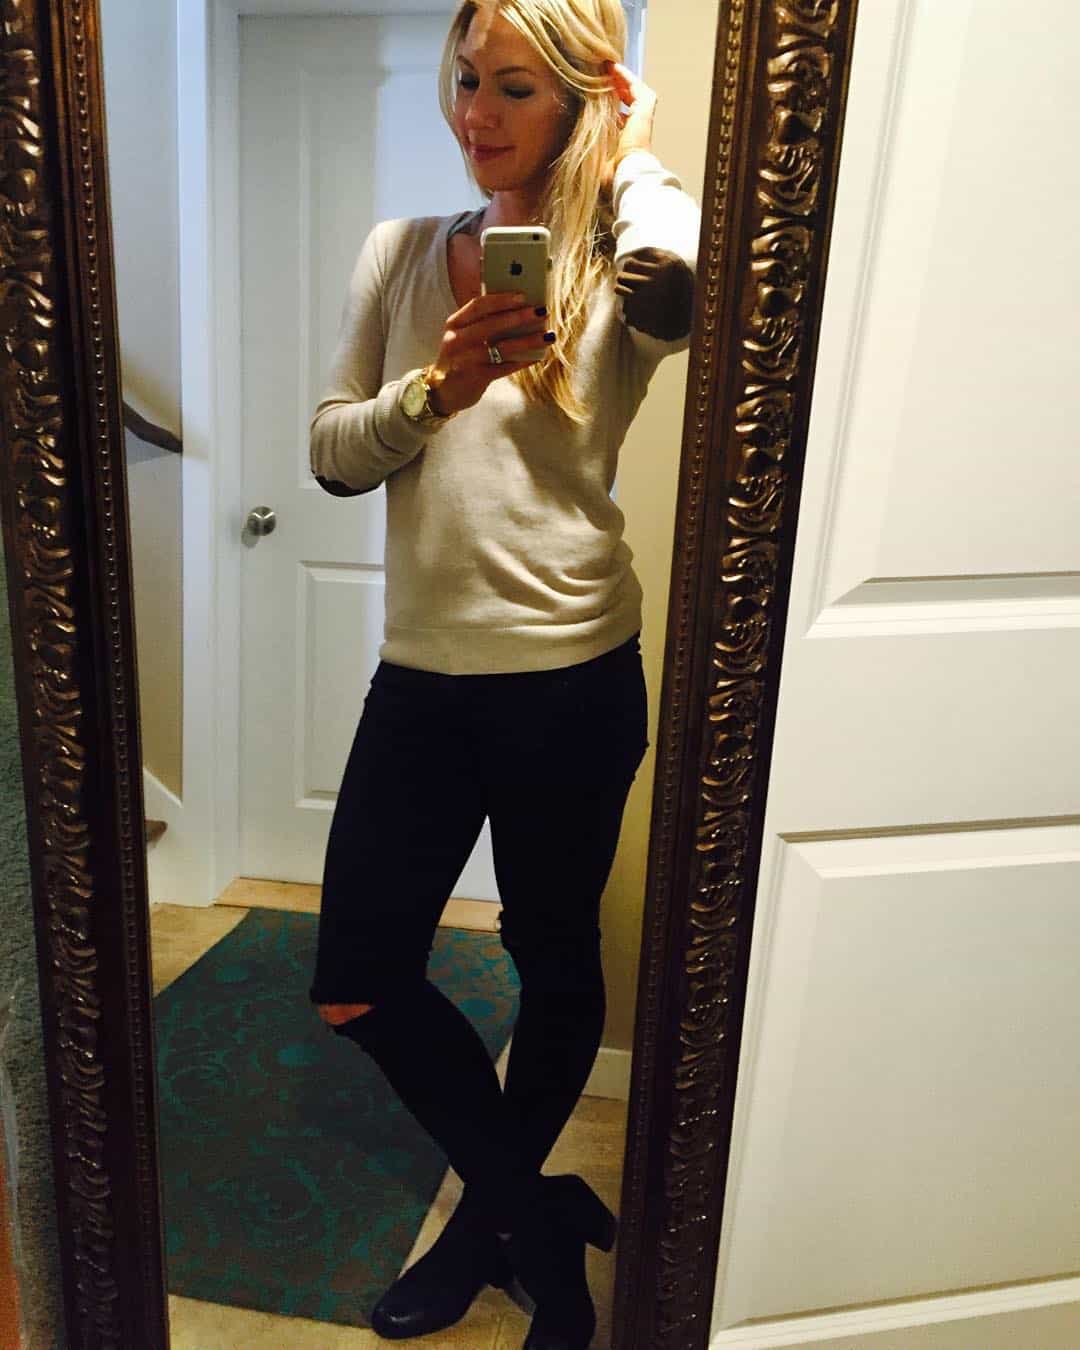 womens clothing, Elbow patches, ripped knees and booties! Yay for a kid-free mommy morning. The fastest 3 hrs I've ever had ;) #workingmom #heels #dressed #noyogapantsforabit